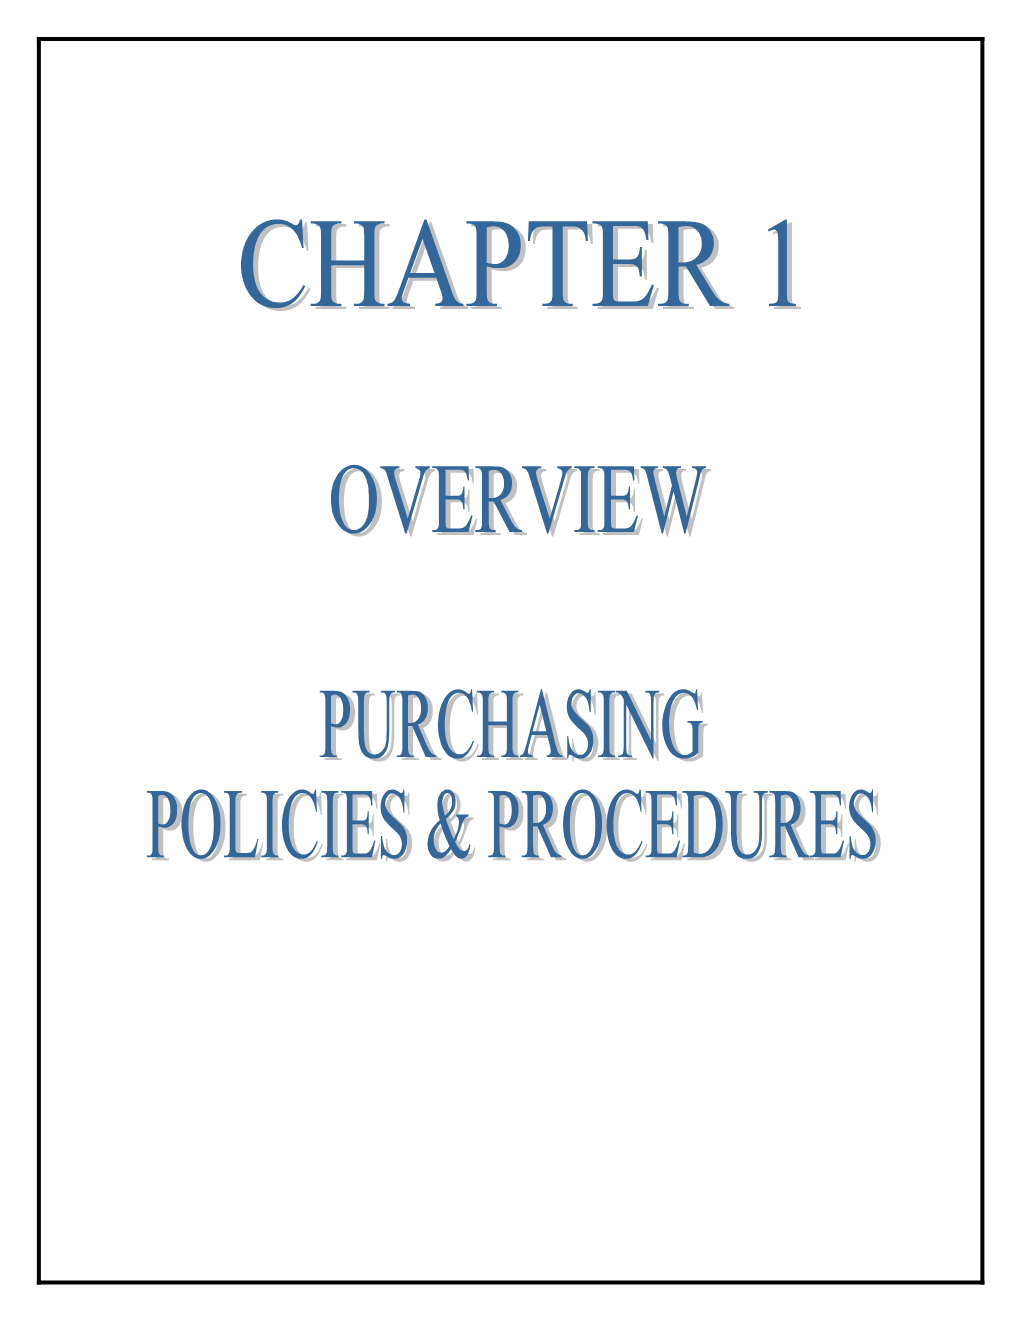 CHAPTER 1, SECTION 1. Purpose and Policy Statement